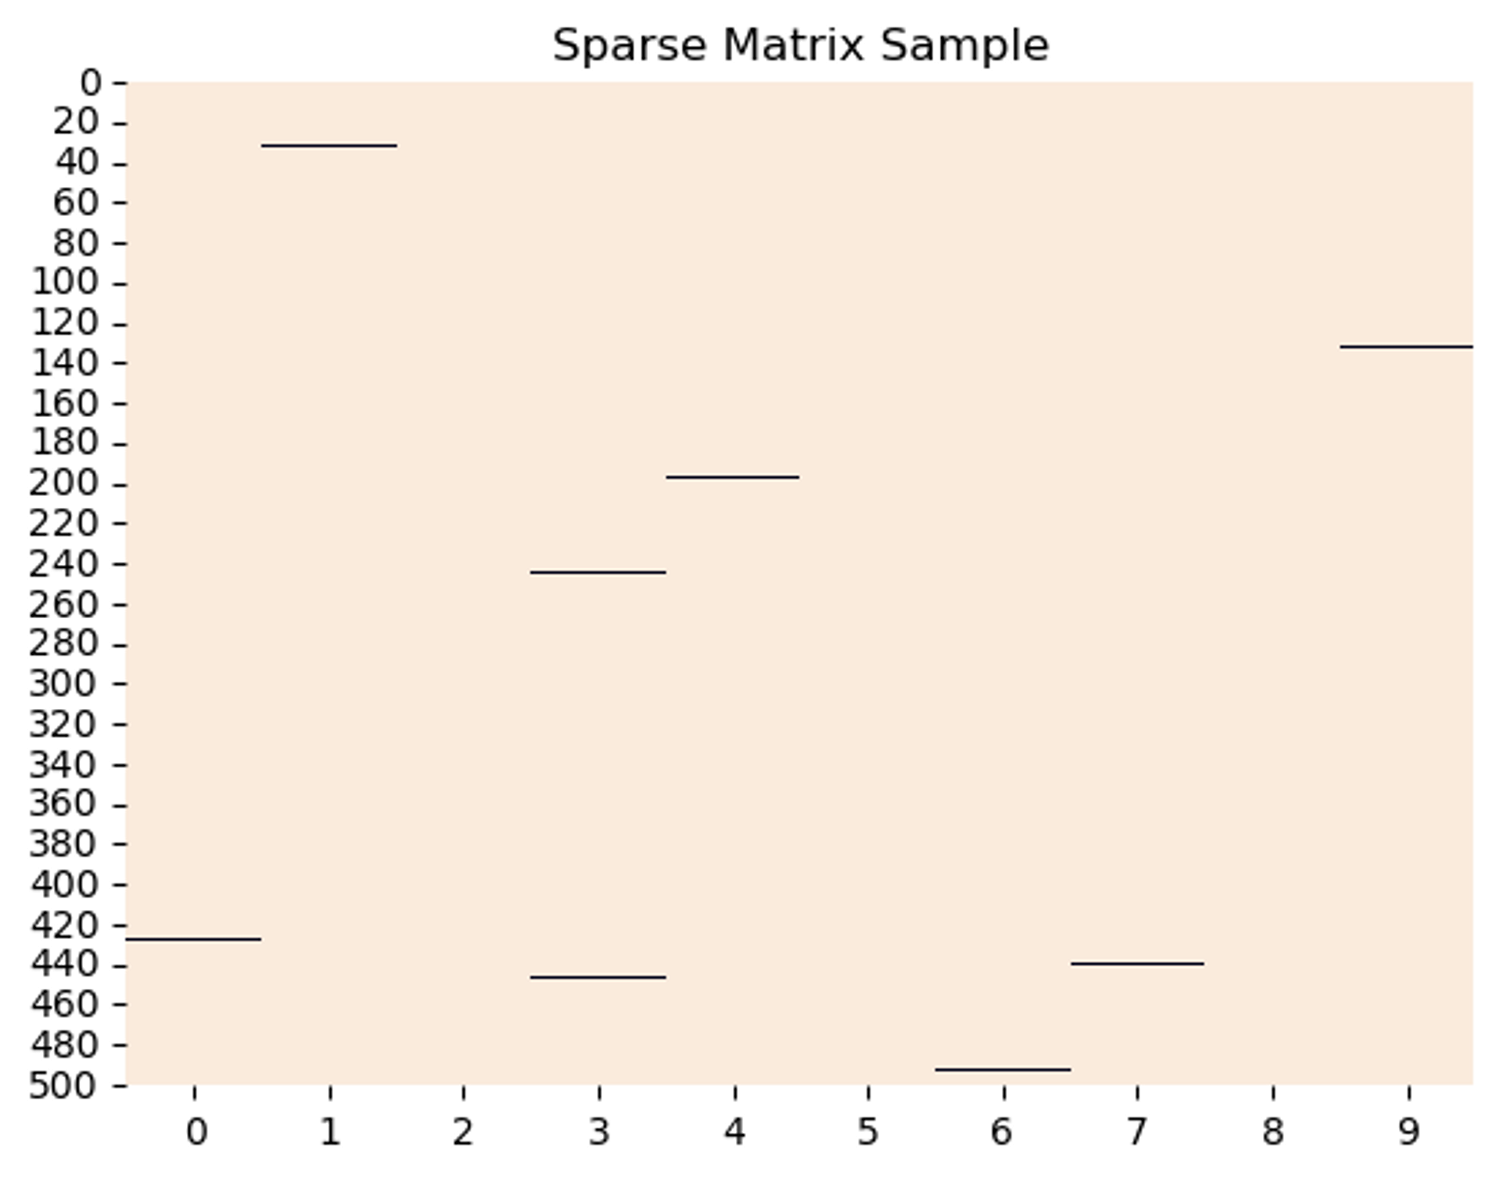 Sample feature matrix of 10 randomly chosen feature variables depicting the sparseness inherent in the feature space.